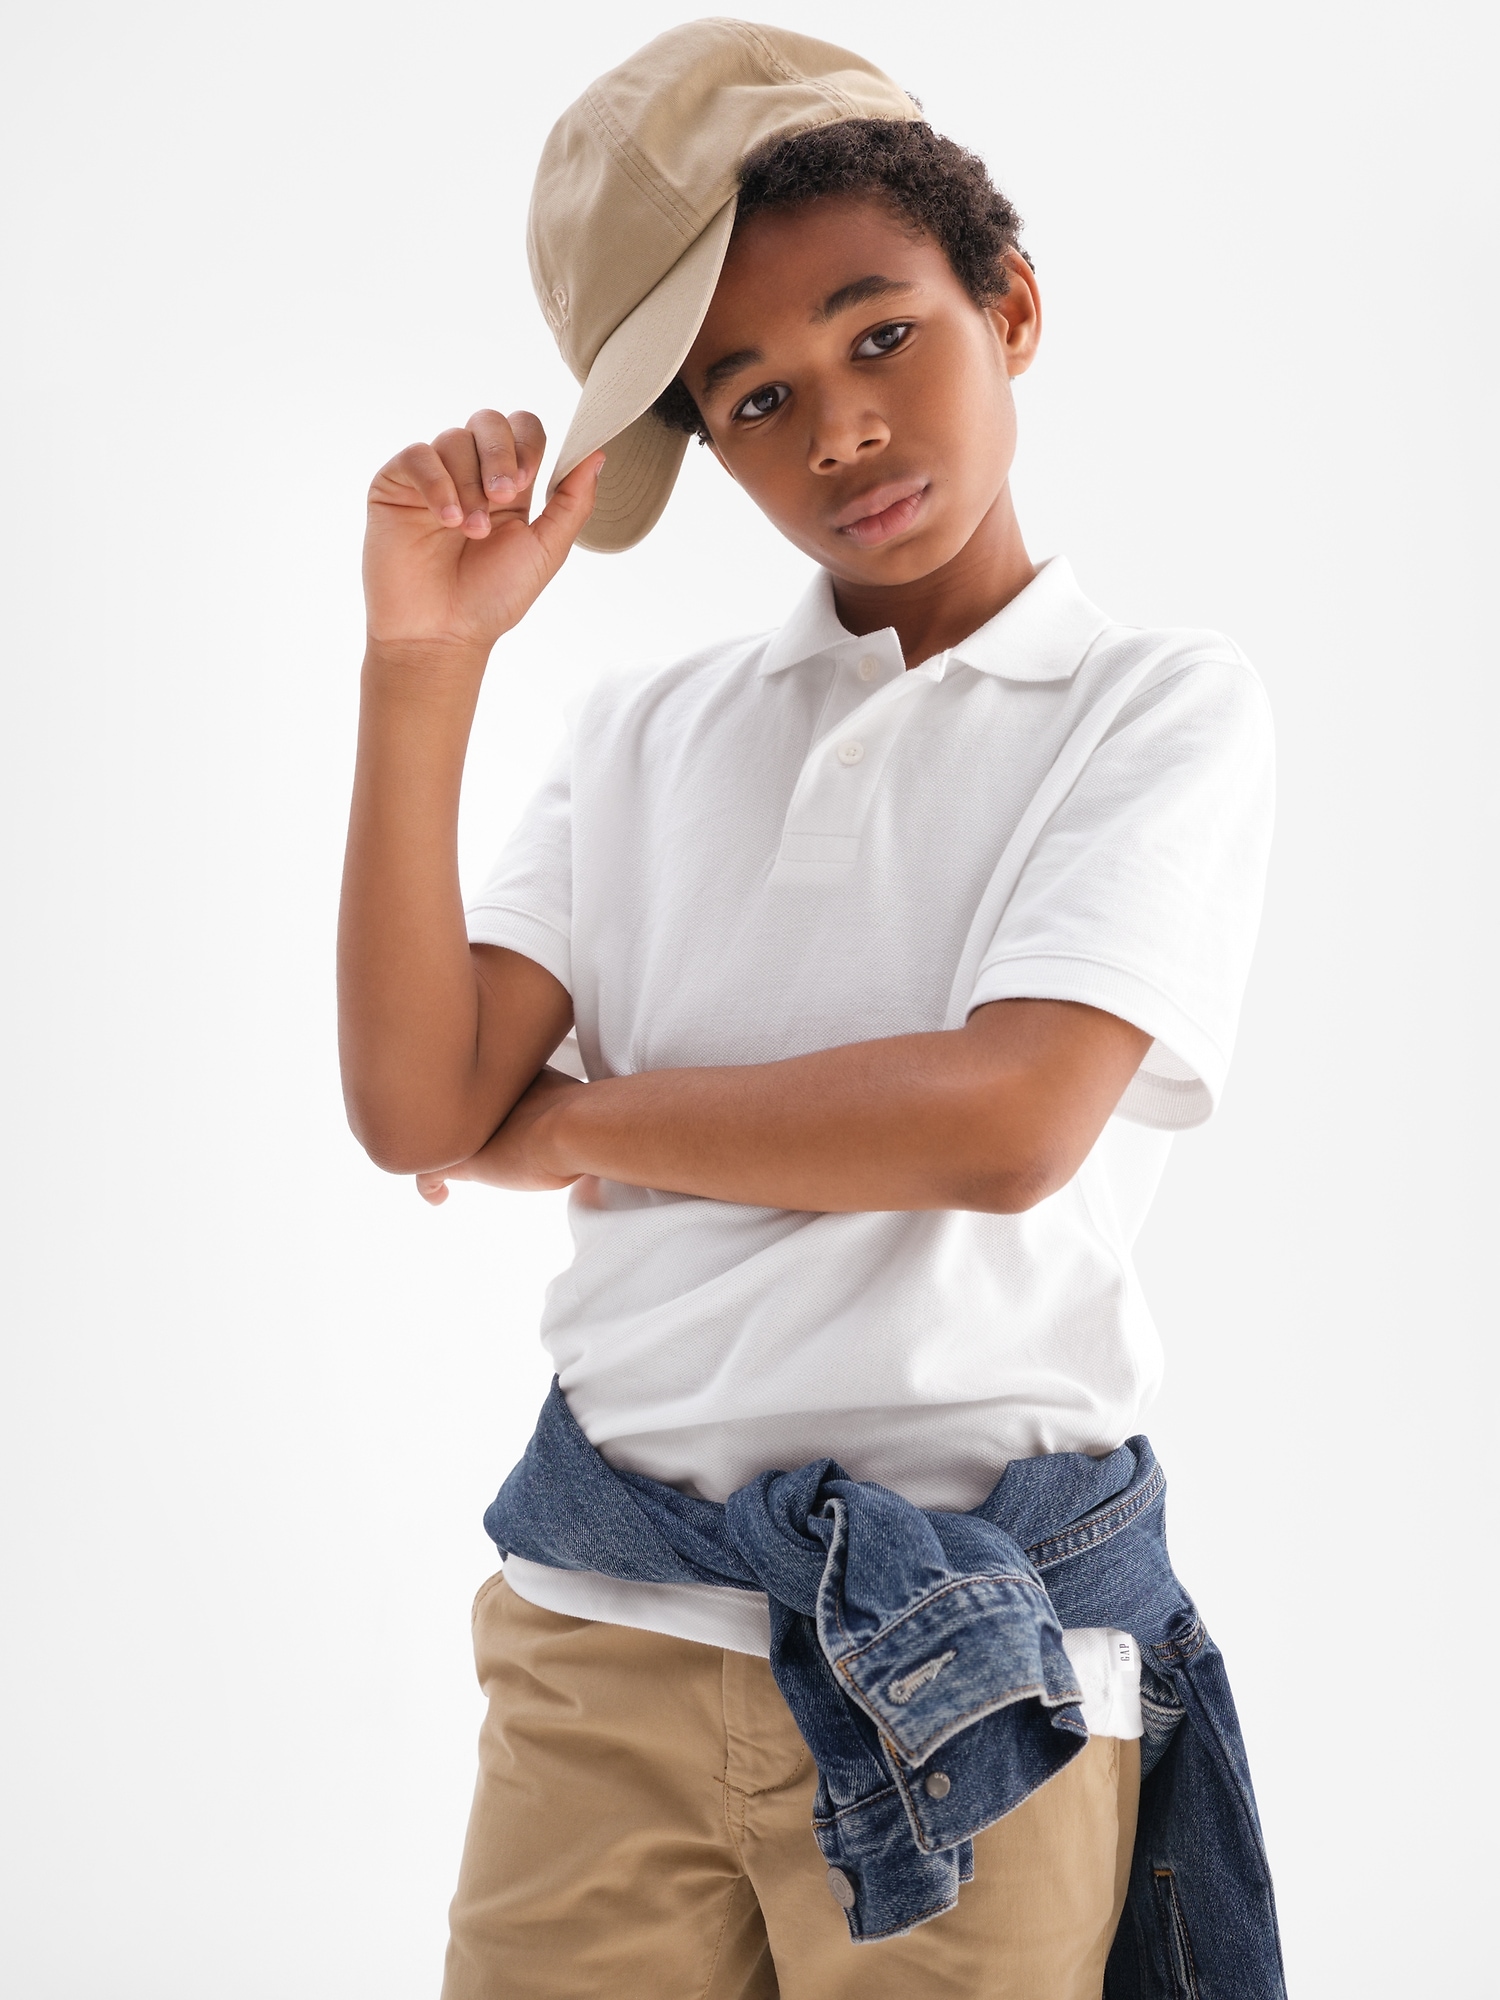 Gap 50% Off Select Kid's School Uniform Outfits: Kid's 100% Organic Cotton Uniform Polo Shirt (Various Colors) $9 + Free Shipping on $50+ or Free Store Pickup at Gap